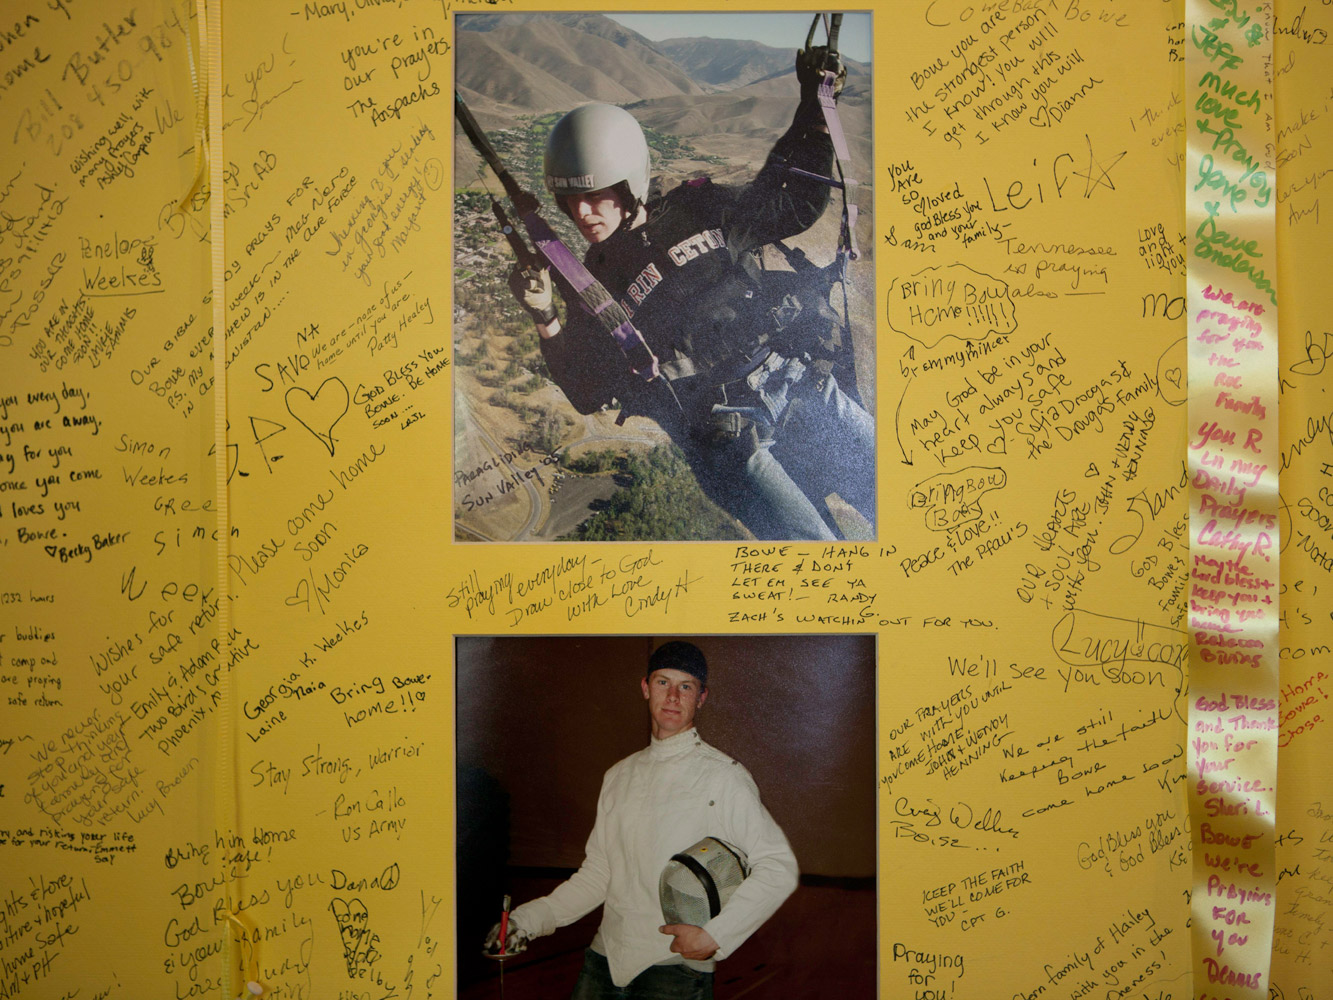 Photographs of Bowe Bergdahl on a large homemade poster that has been
                              signed by Bowe's loved ones and members of the community in Hailey, Idaho.
                              The poster is tacked to the wall in Zaney's coffee house.